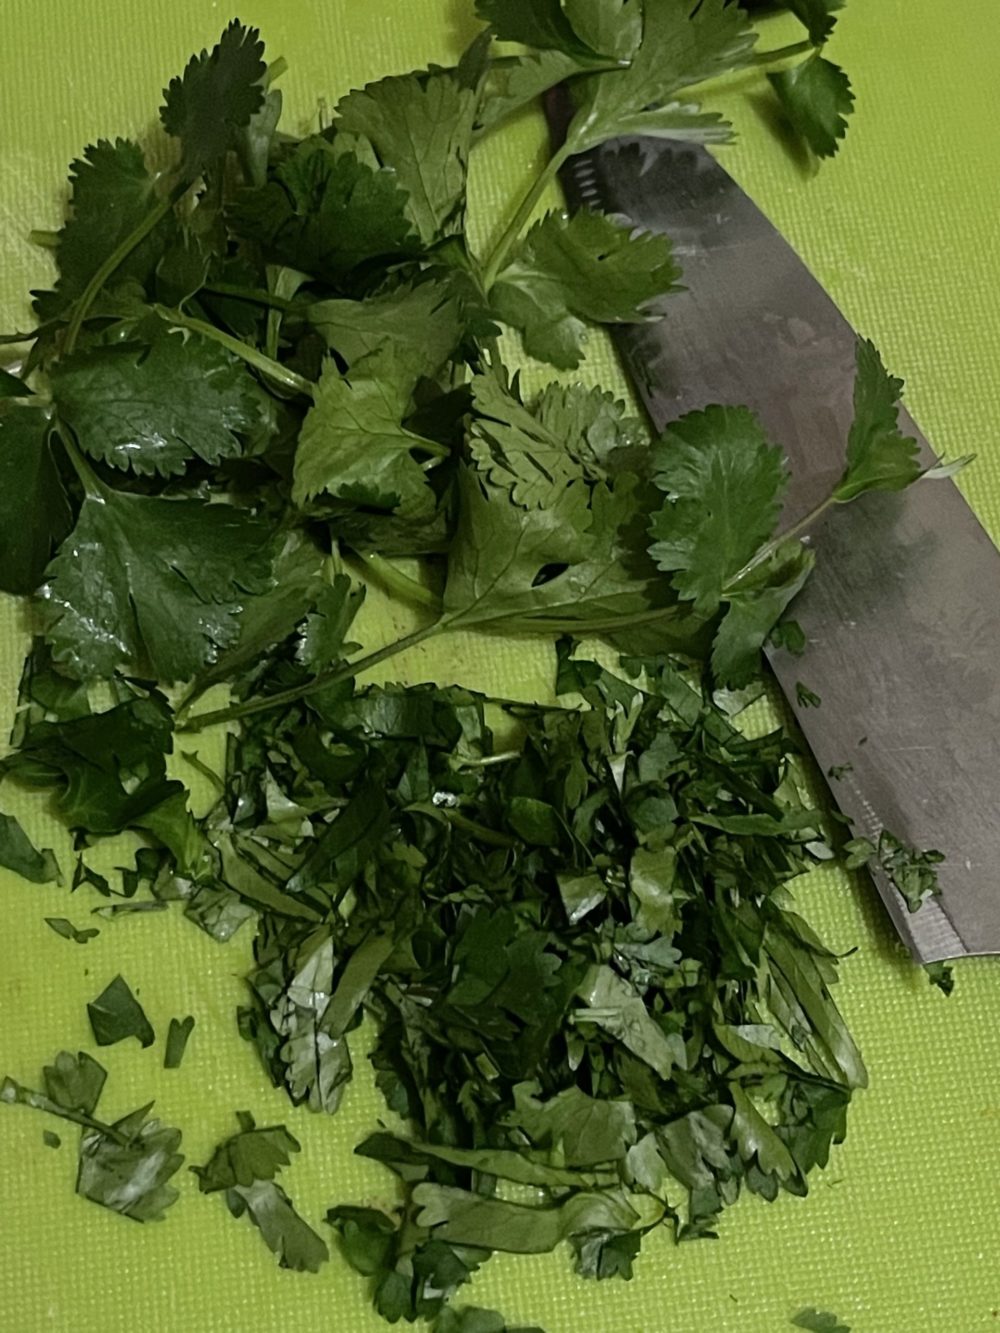 Chopped parsley and knife on a green background